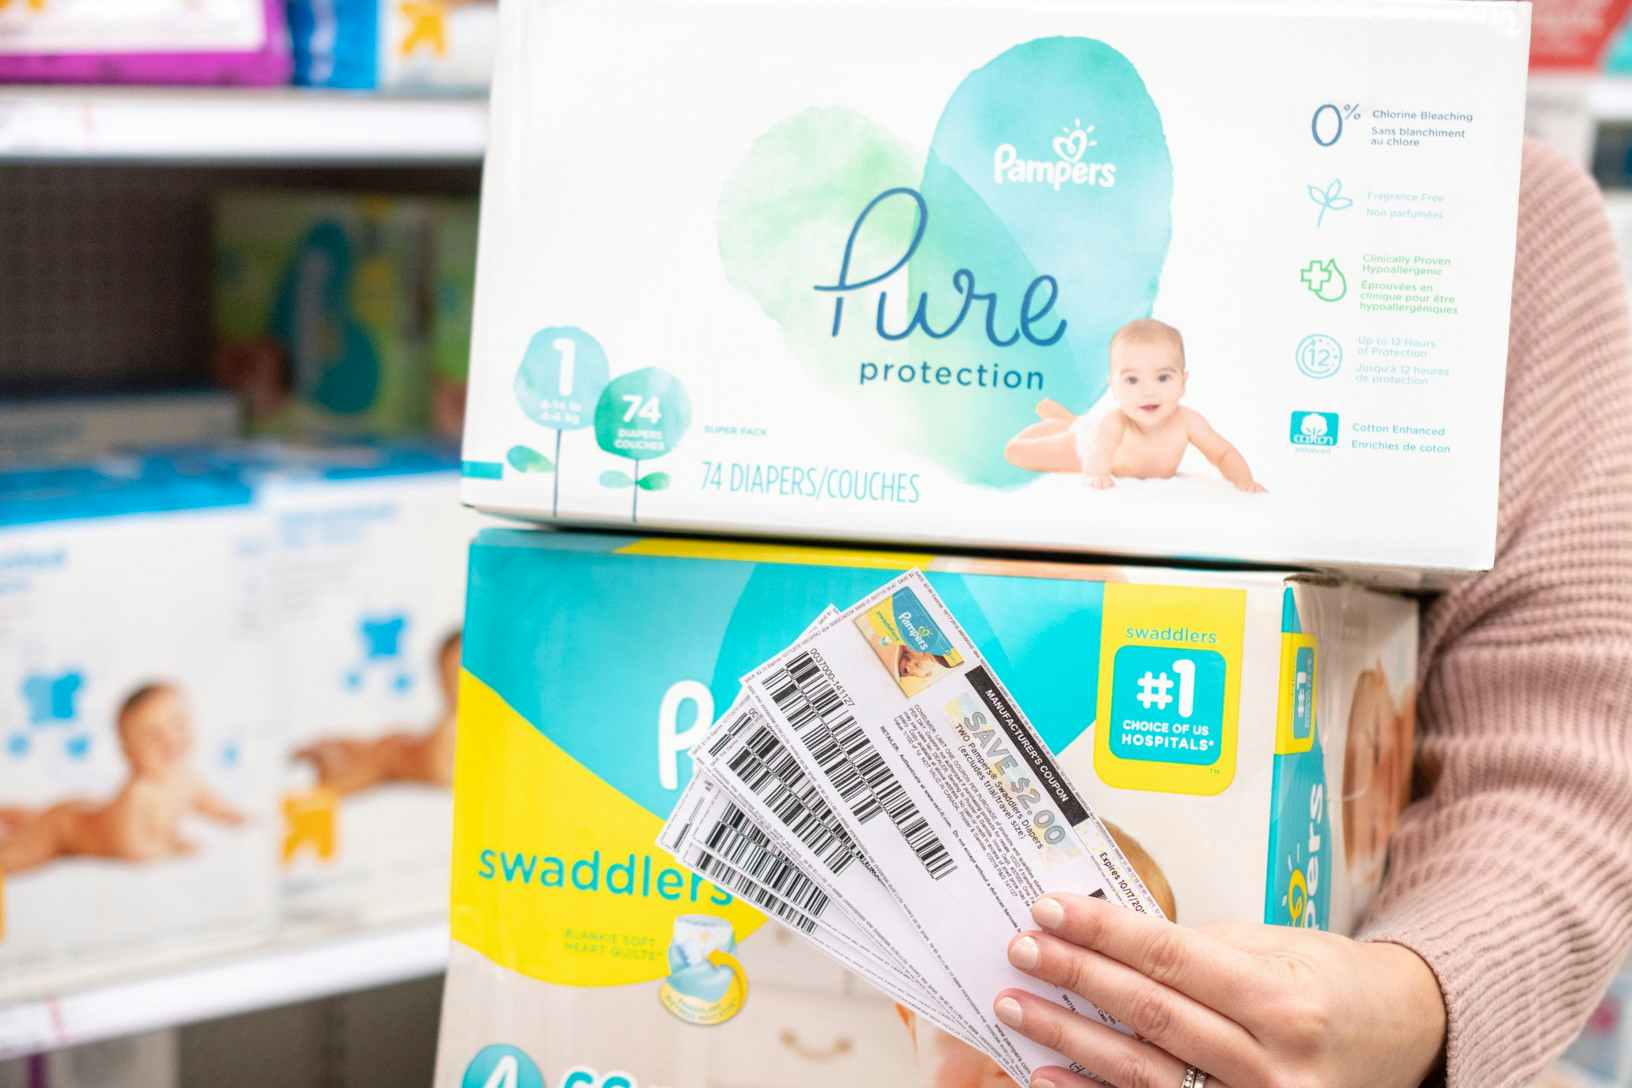 person in store holding boxes of Pampers diapers and coupons